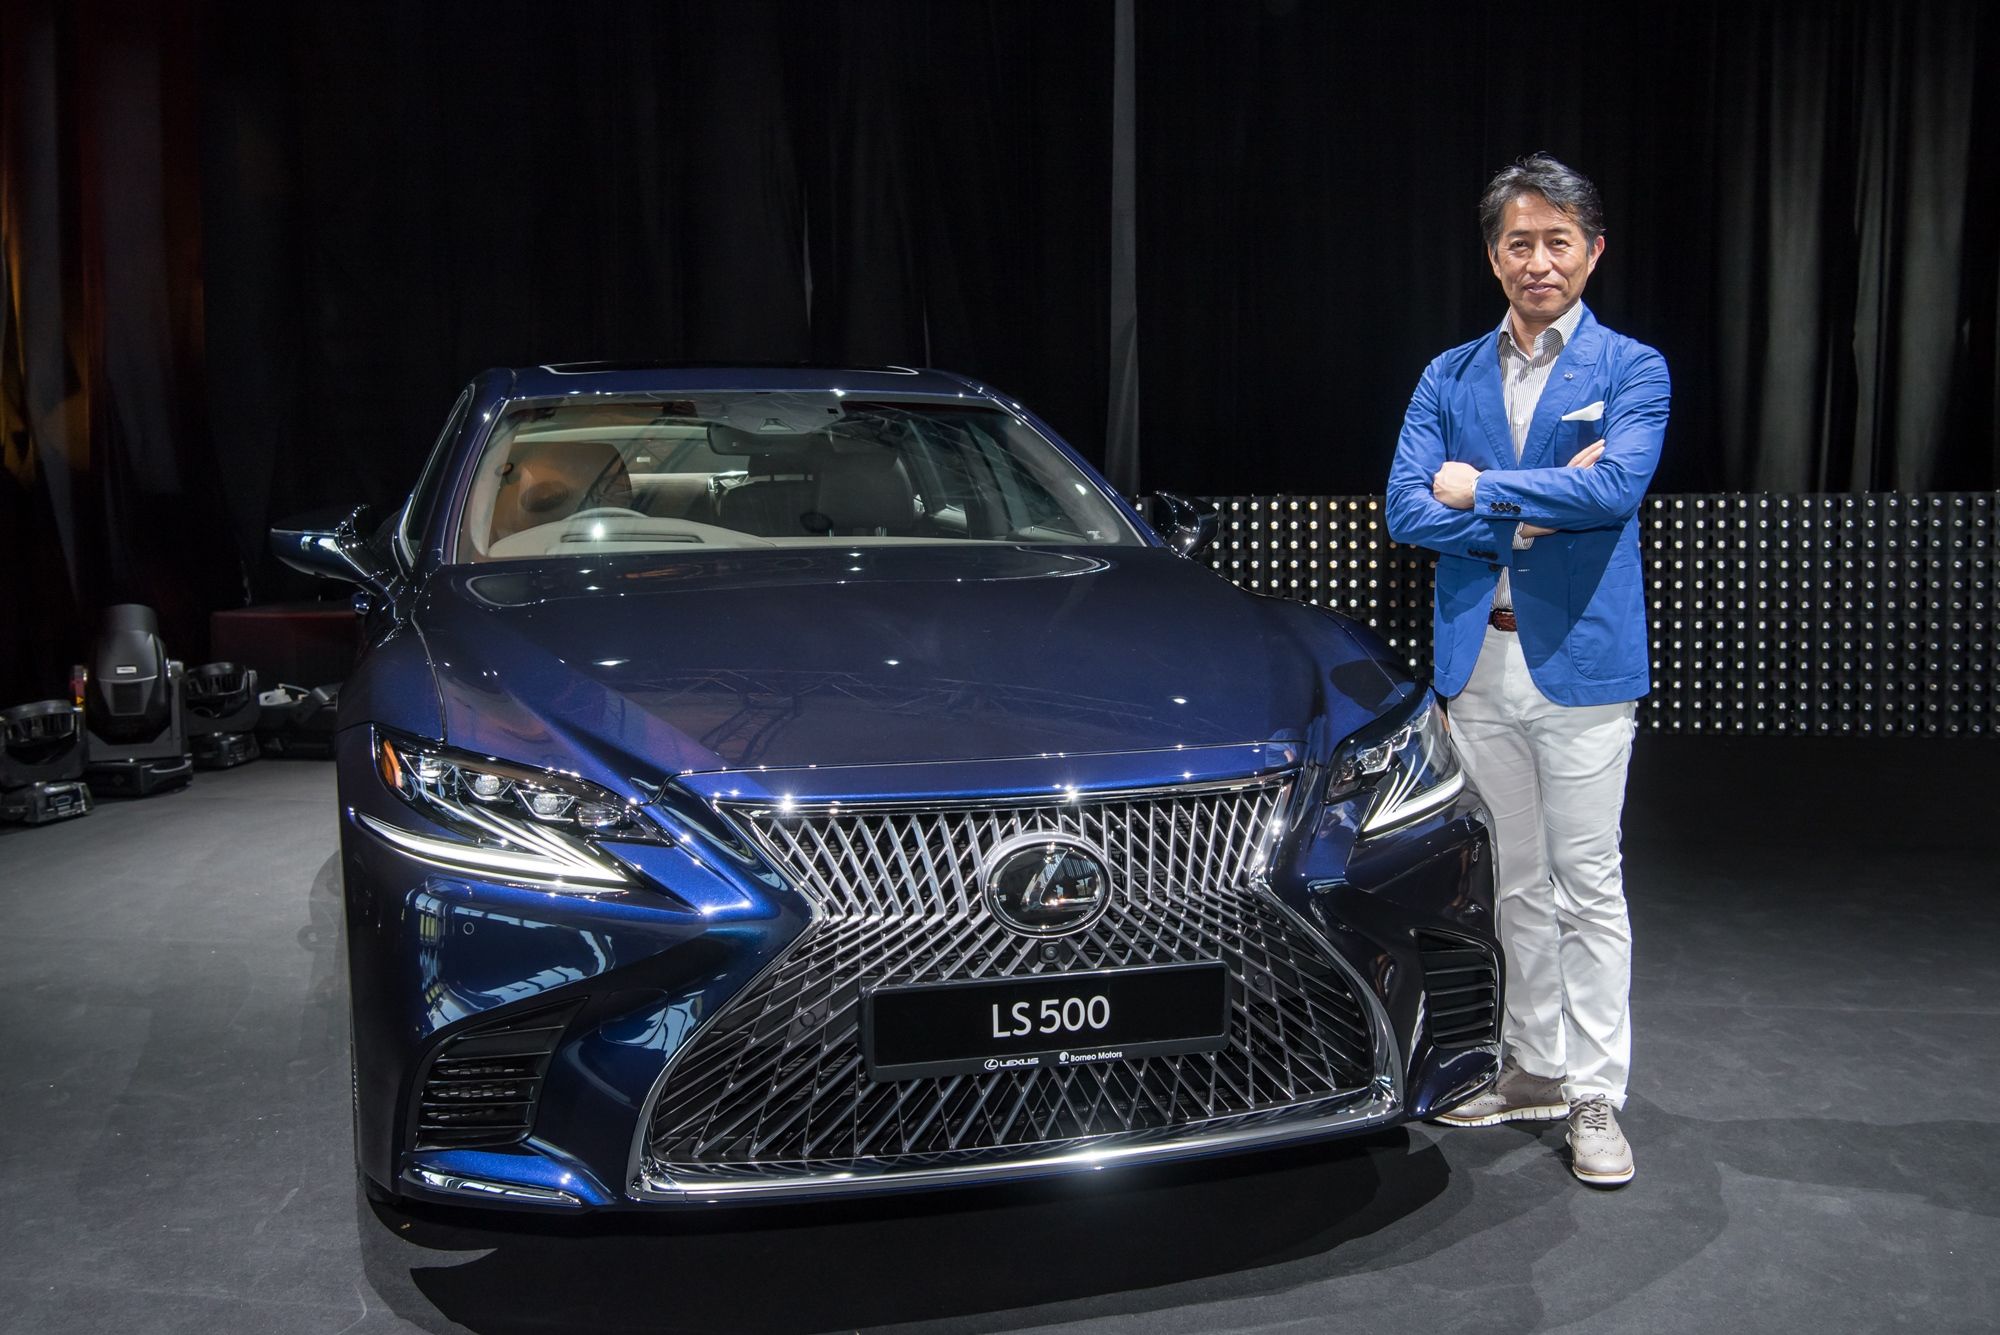 The man behind the new radical design of the 2018 Lexus LS